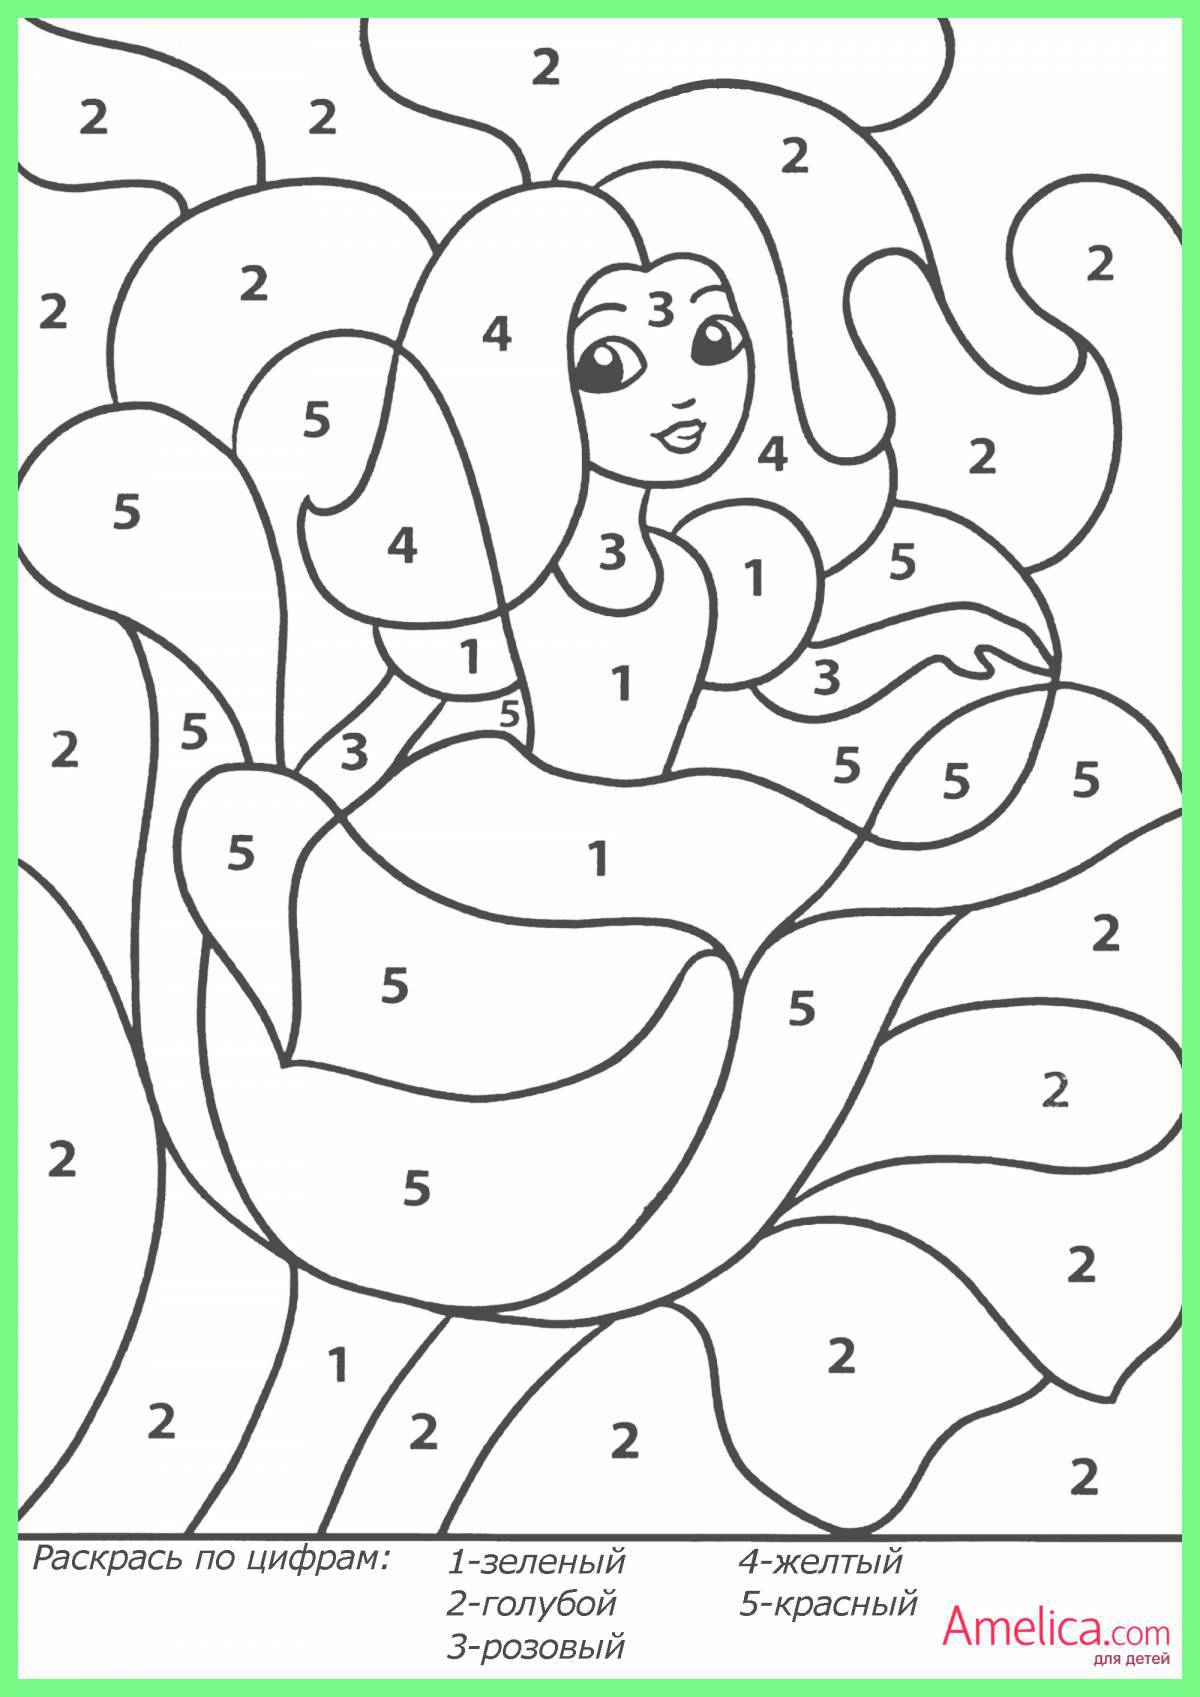 Educational coloring by numbers for children 5-6 years old